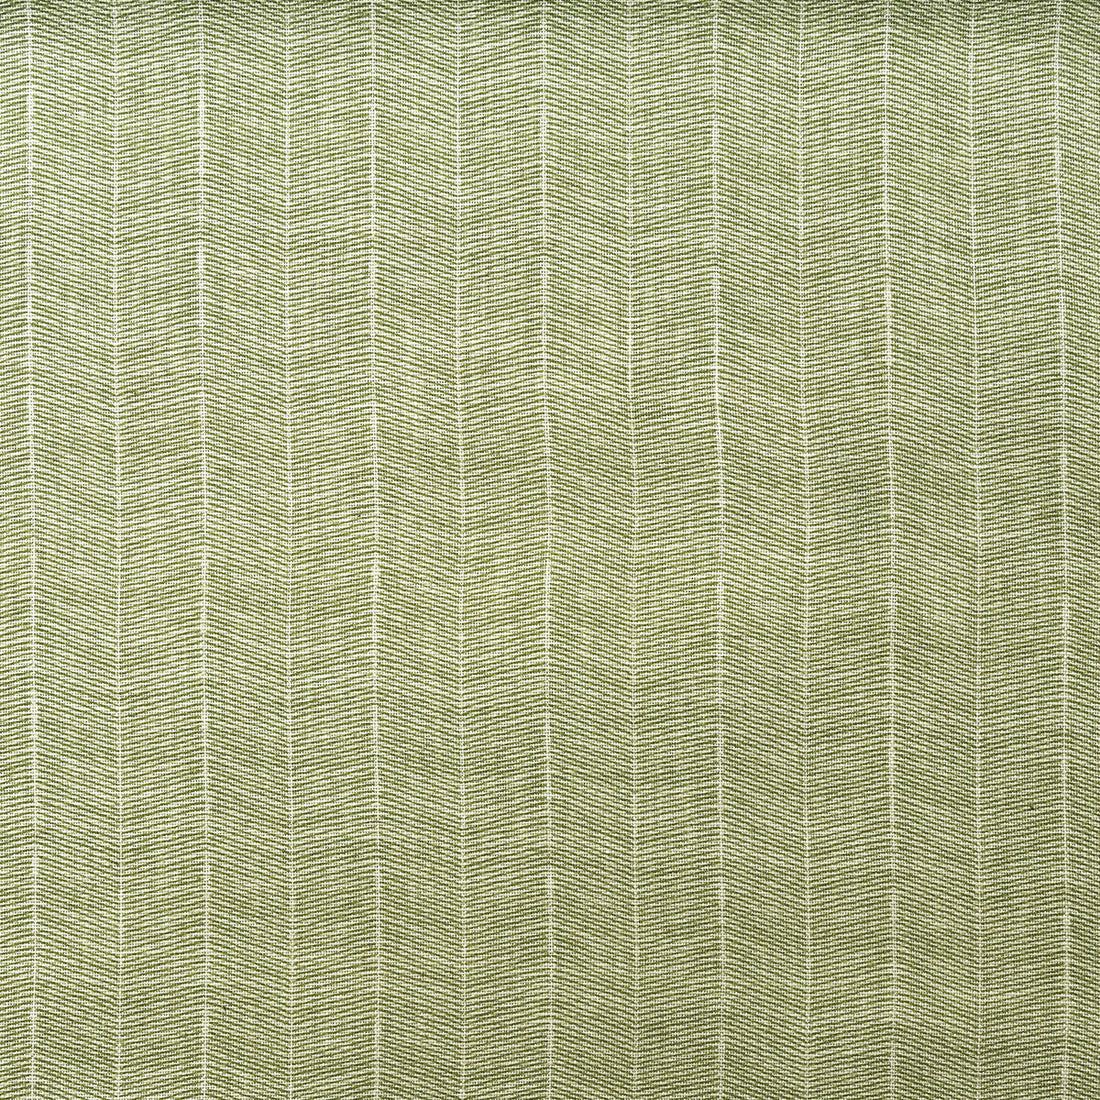 Furrow fabric in leaf color - pattern AM100380.3.0 - by Kravet Couture in the Andrew Martin Garden Path collection